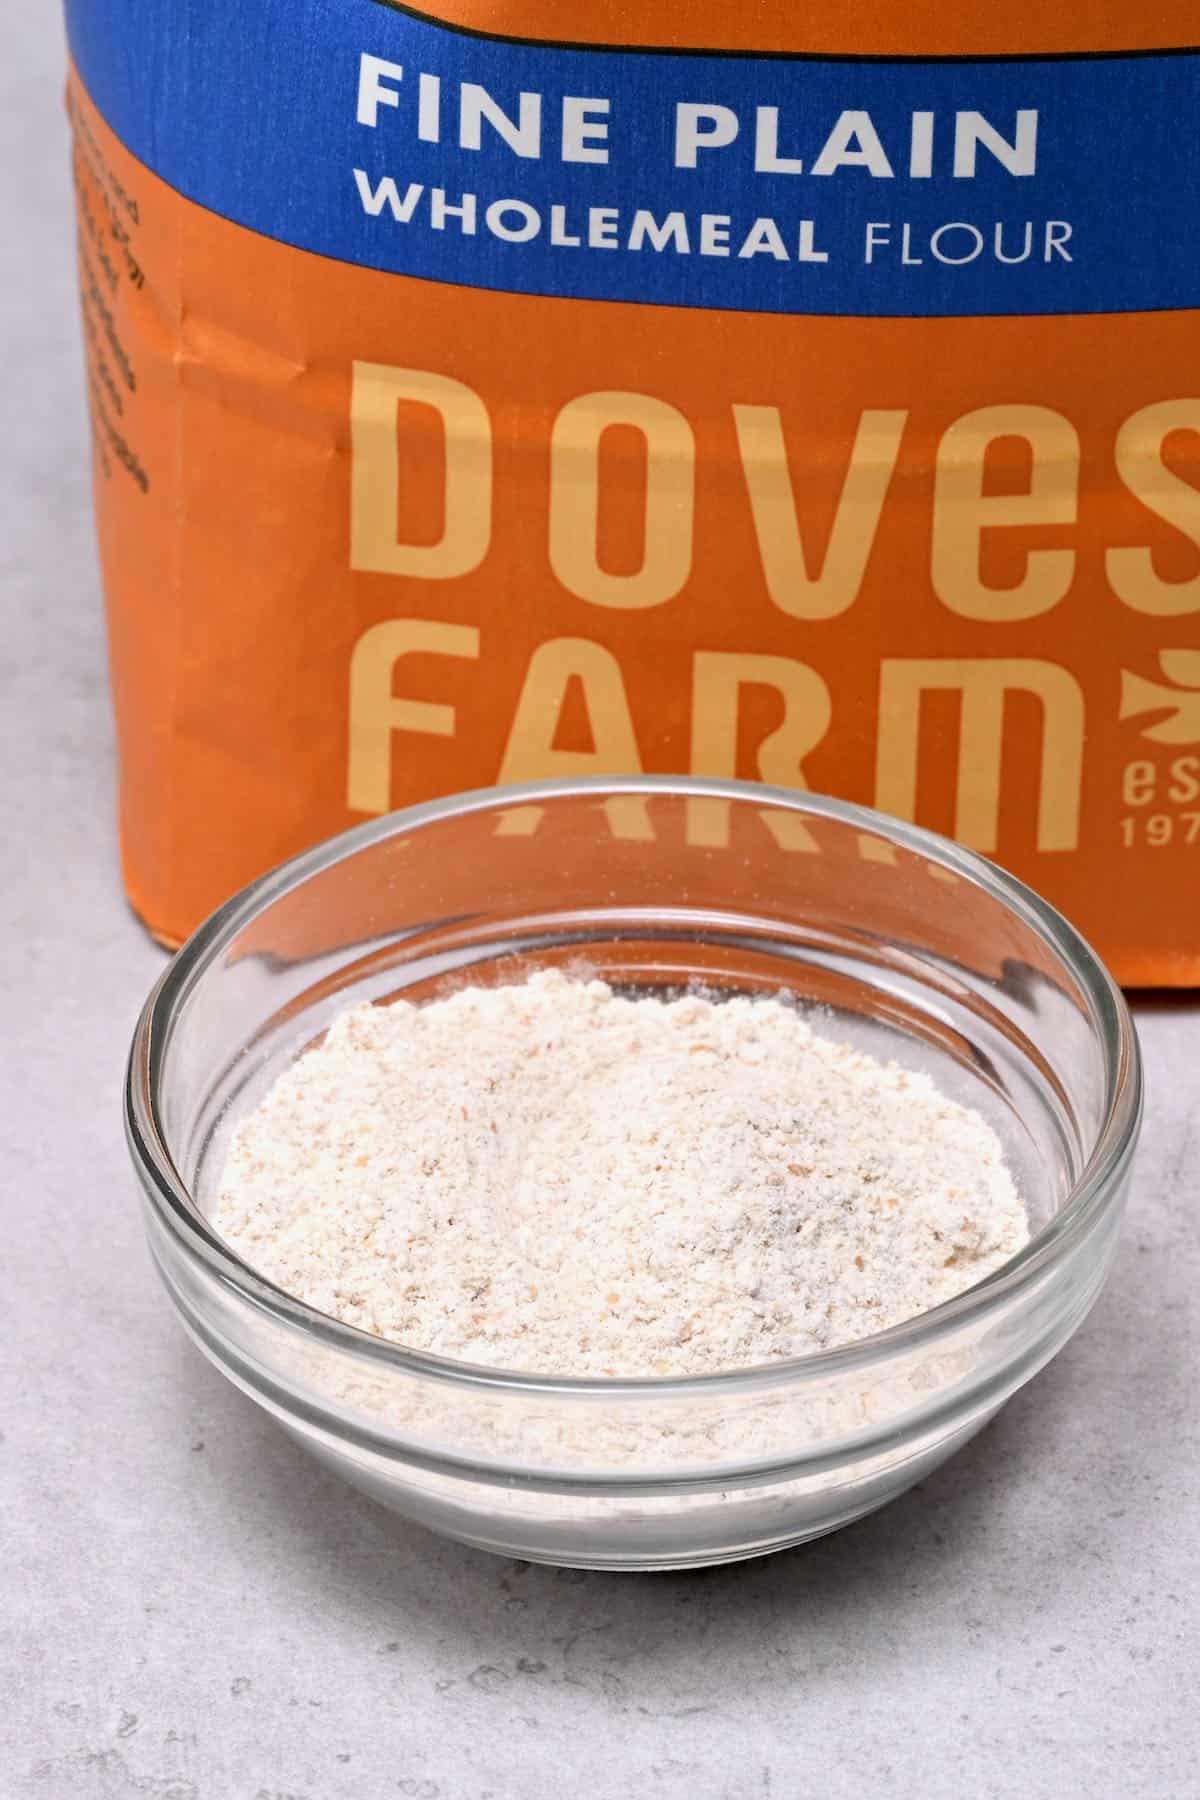 wholemeal flour in a glass bowl with wholemeal flour bag behind